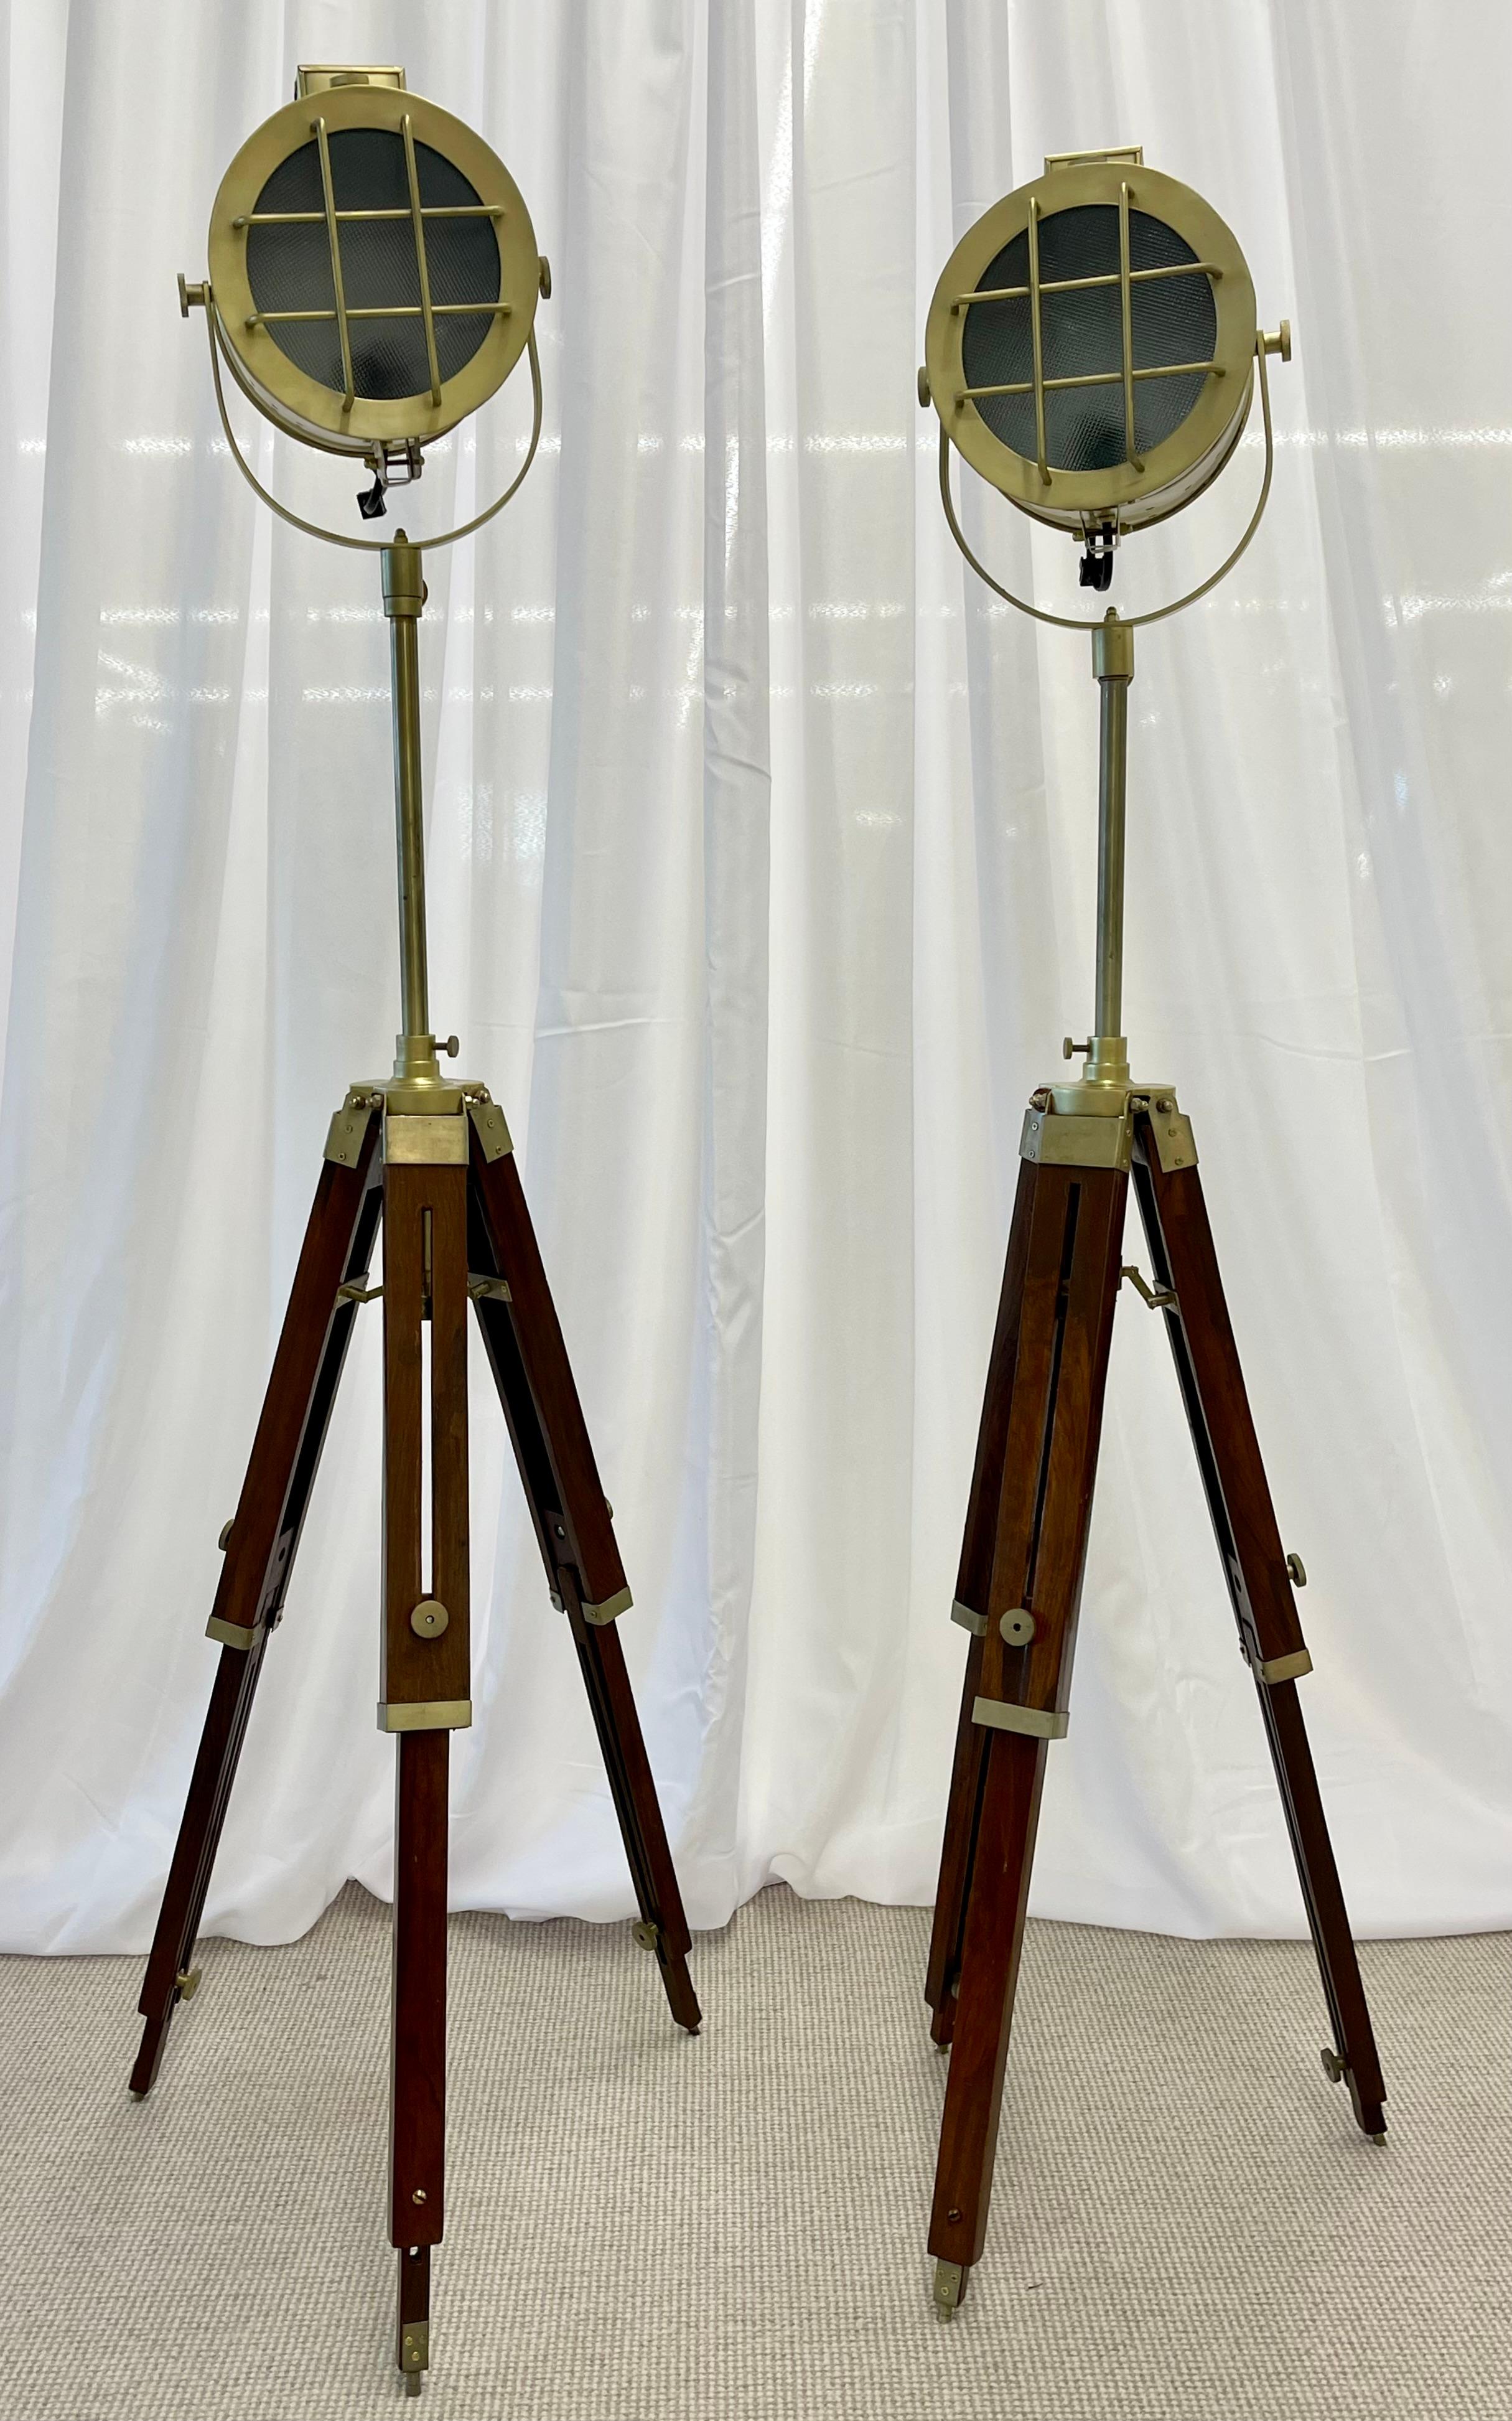 Pair of Industrial style search lights, the brass adjustable search lights supported on a wooden tripod base. Height is adjustable on base and on top of base.

The light itself measures 7.5